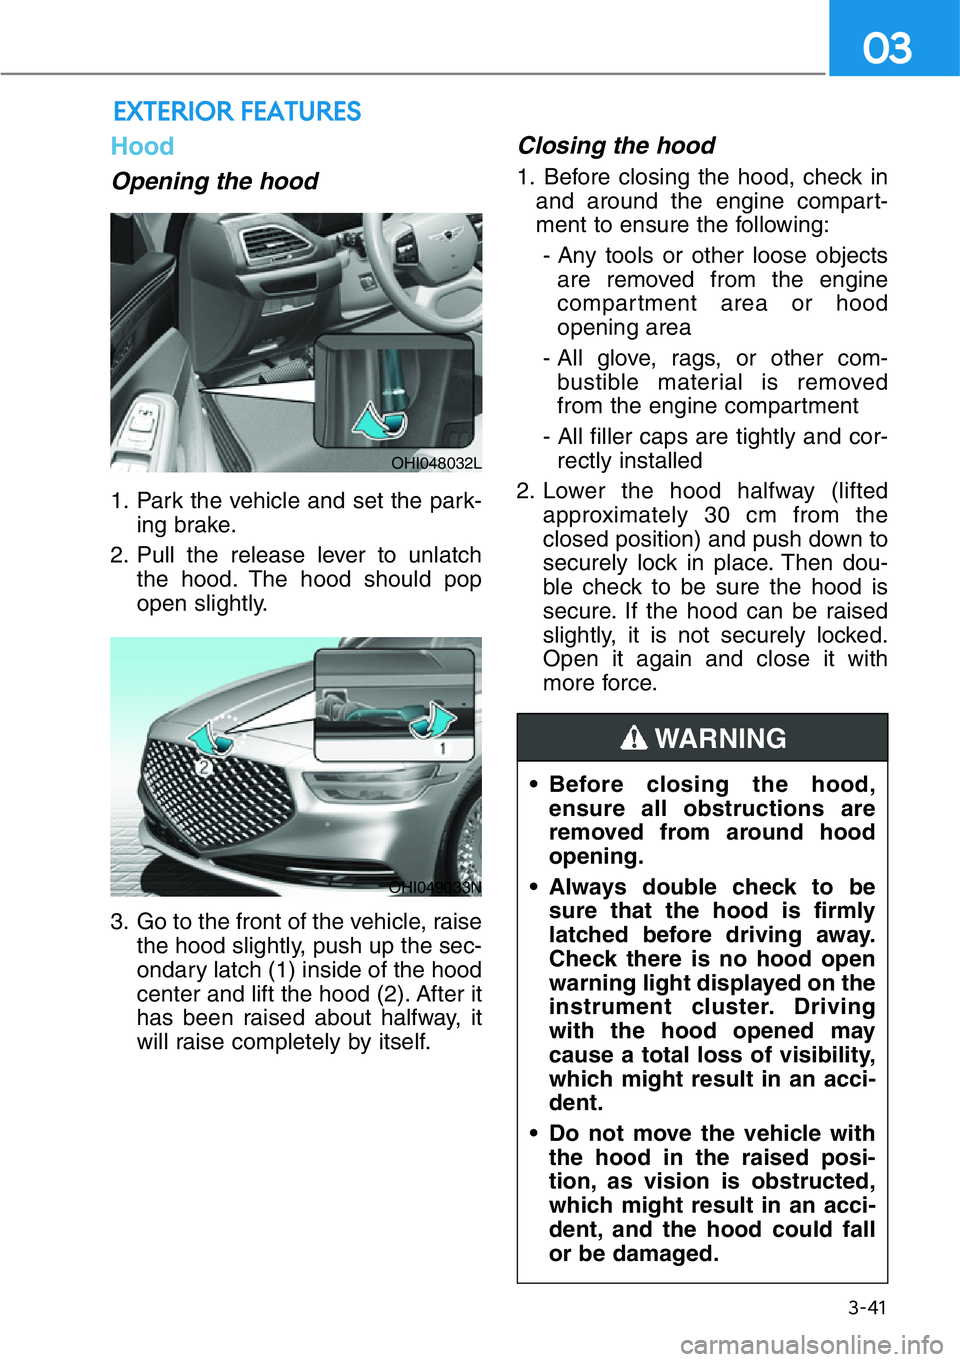 GENESIS G90 2021  Owners Manual 3-41
03
Hood
Opening the hood 
1. Park the vehicle and set the park-
ing brake.
2. Pull the release lever to unlatch
the hood. The hood should pop
open slightly.
3. Go to the front of the vehicle, rai